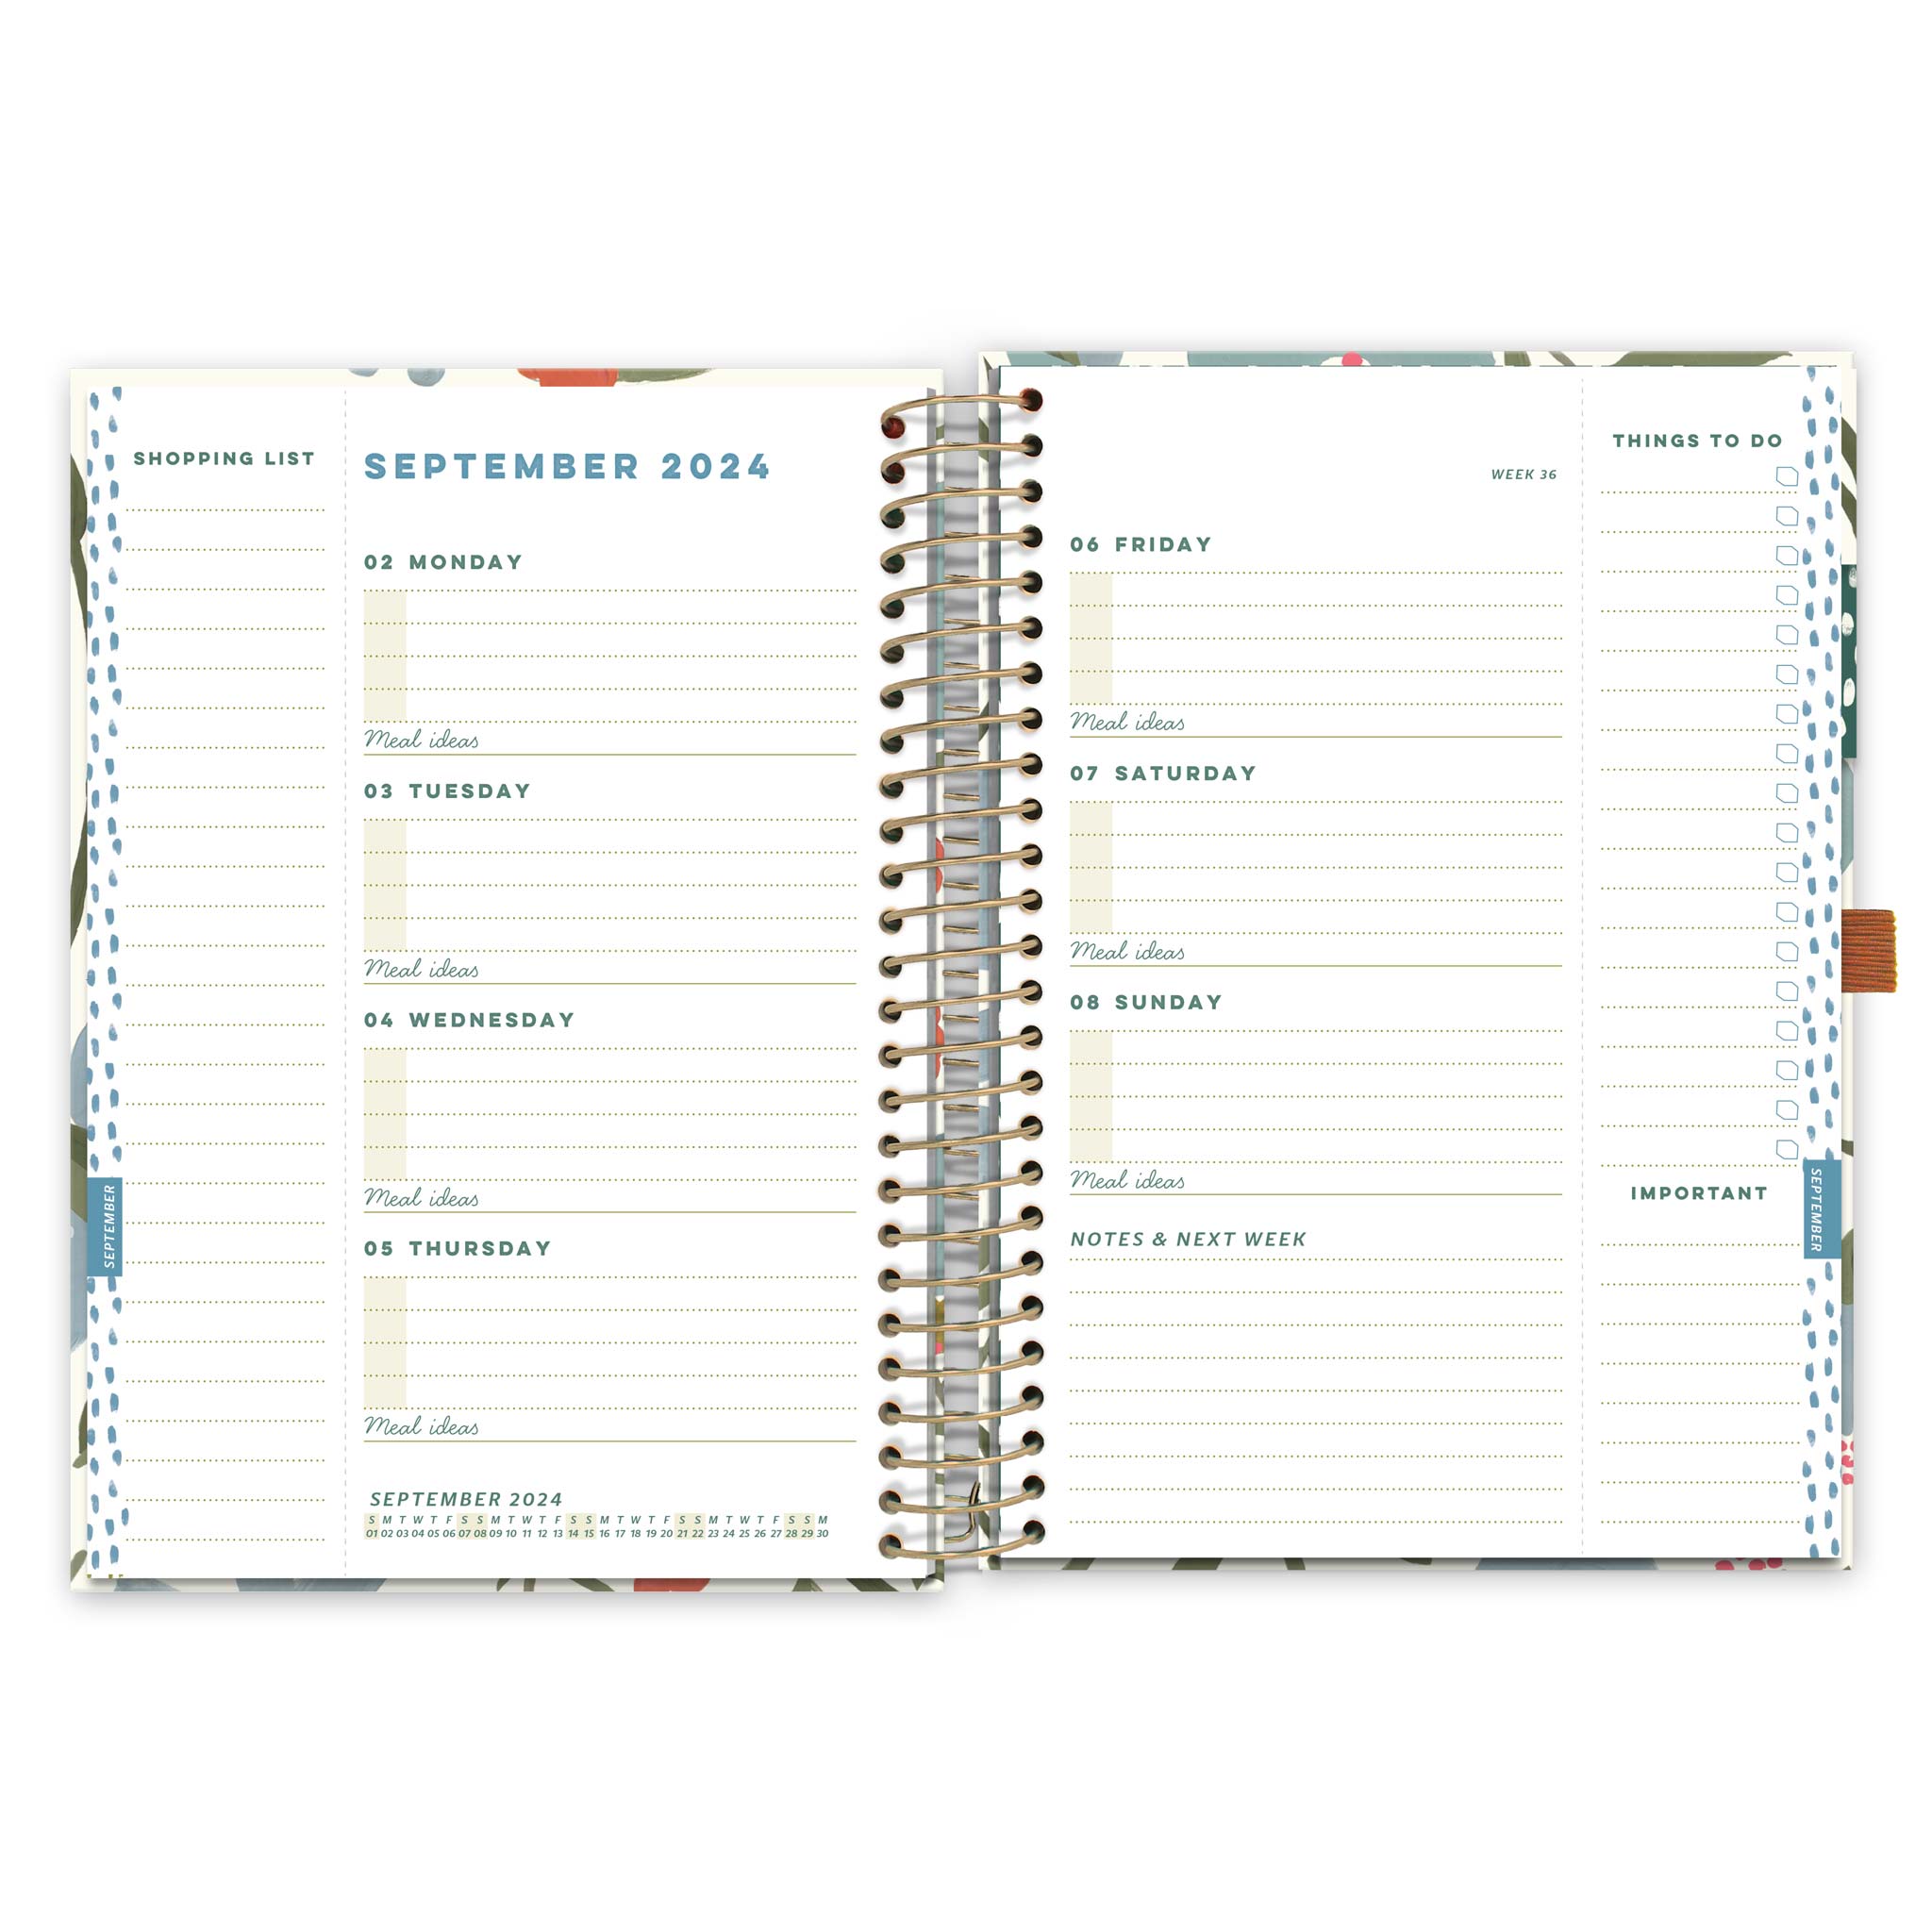 An inside diary spread showing September 2024